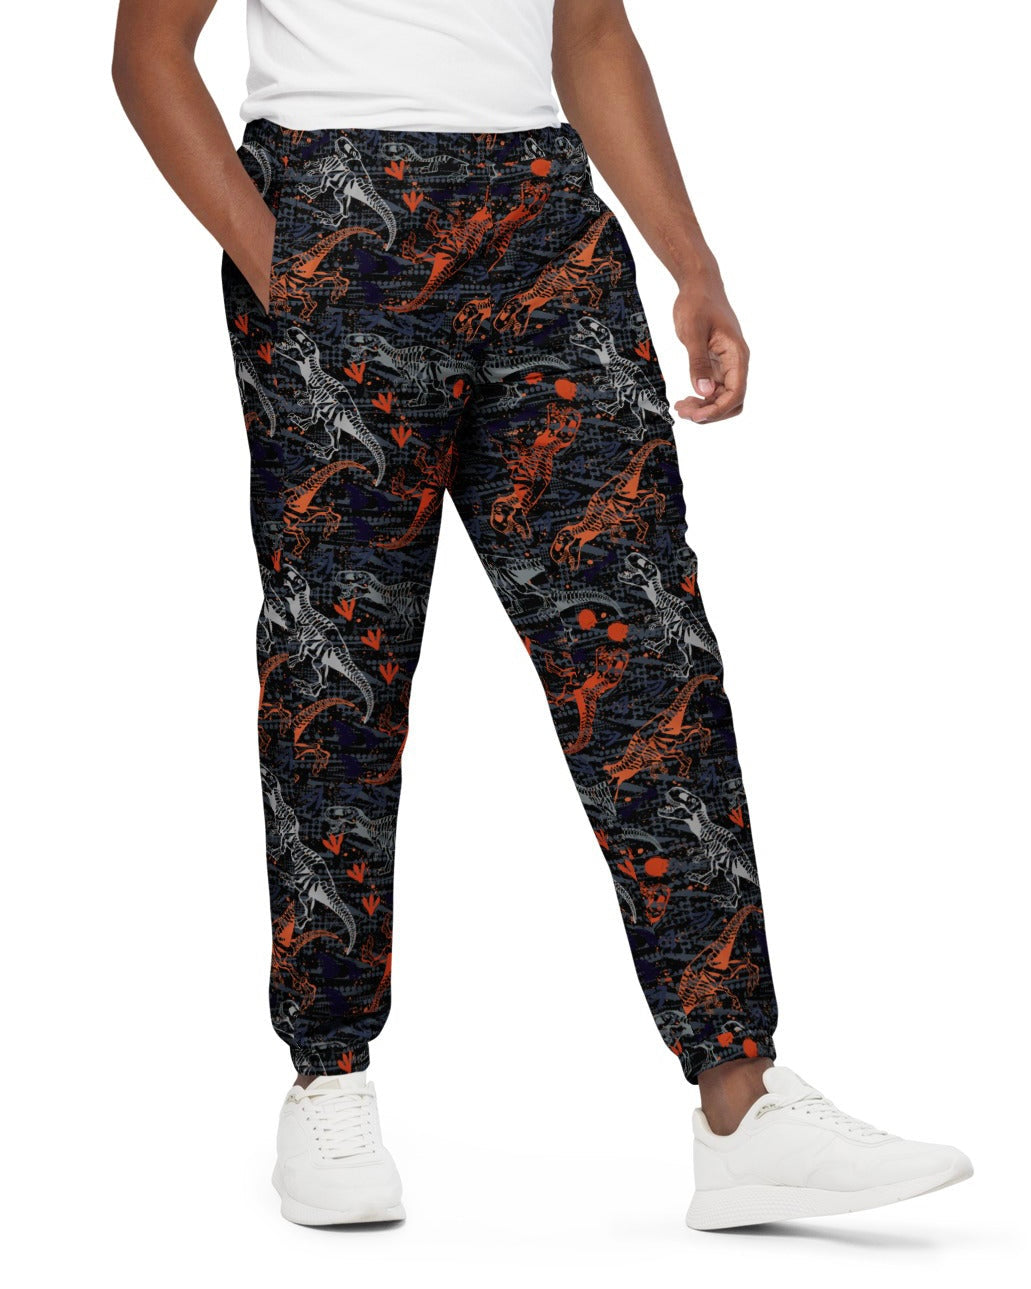 Side view of model wearing One Stop Rave's T-Wrecked Unisex Track Pants, showing off the dynamic dinosaur print.